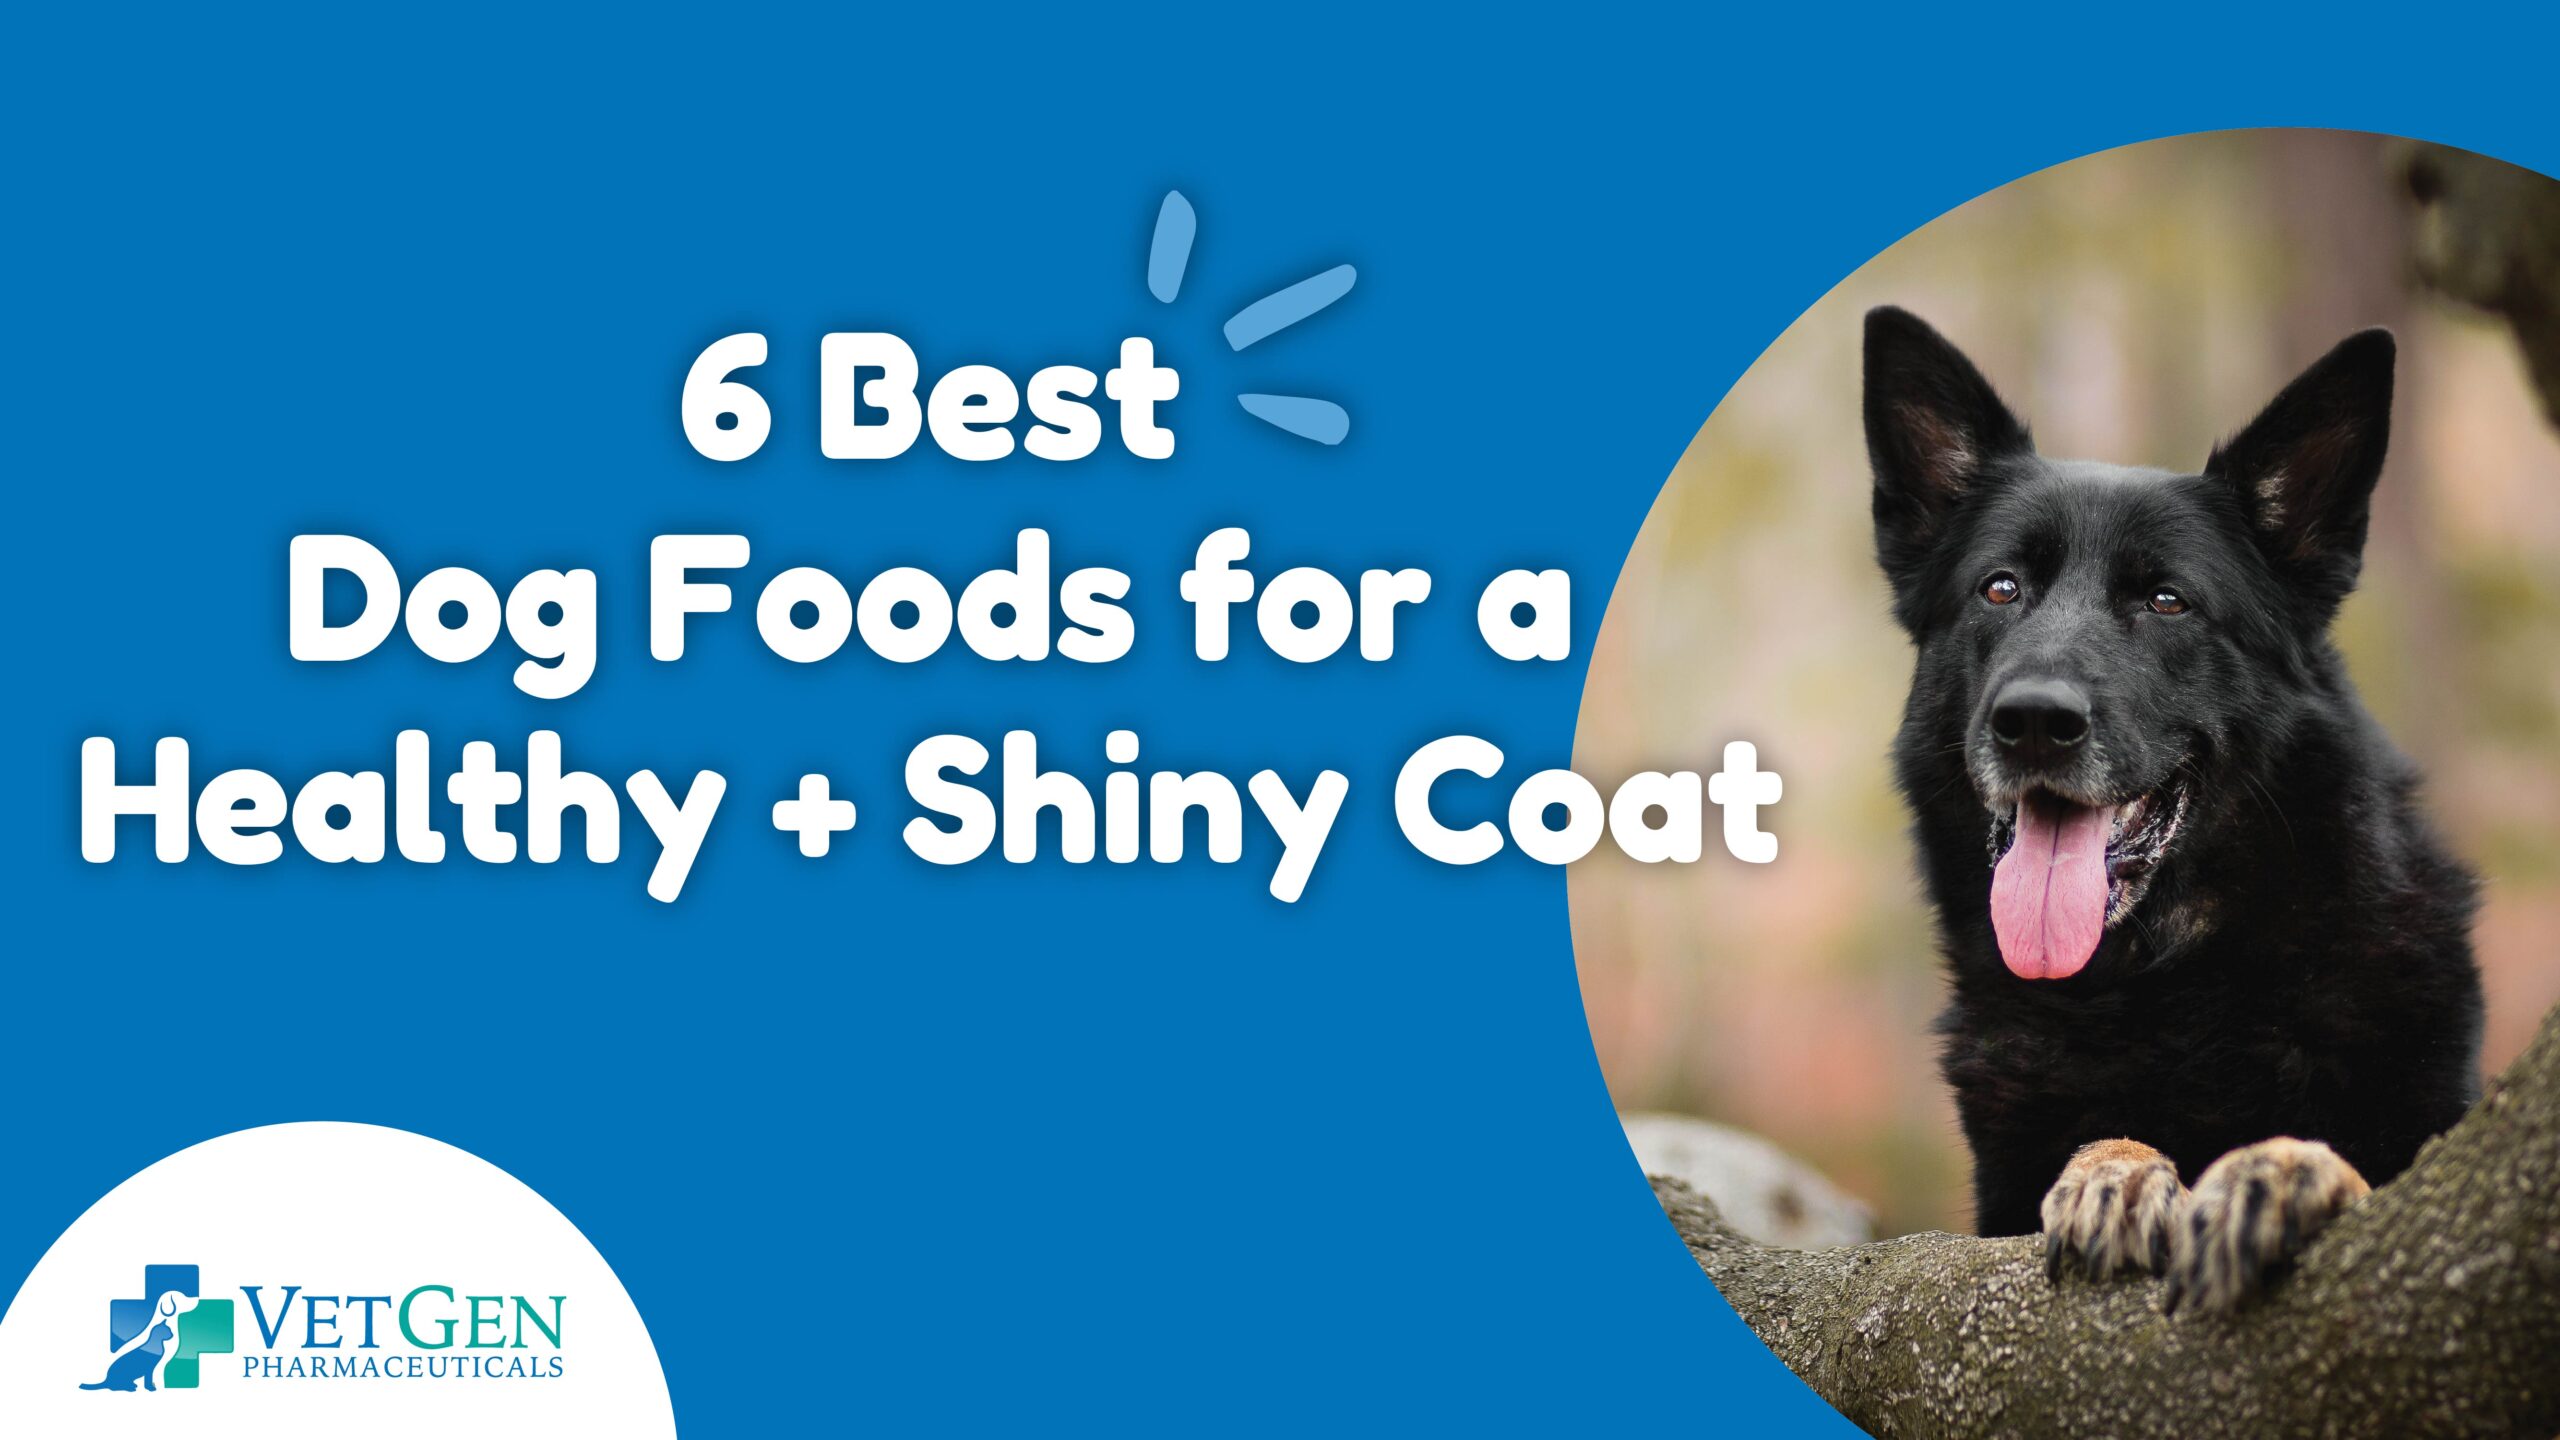 6 Best Dog Foods for a Healthy and Shiny Coat